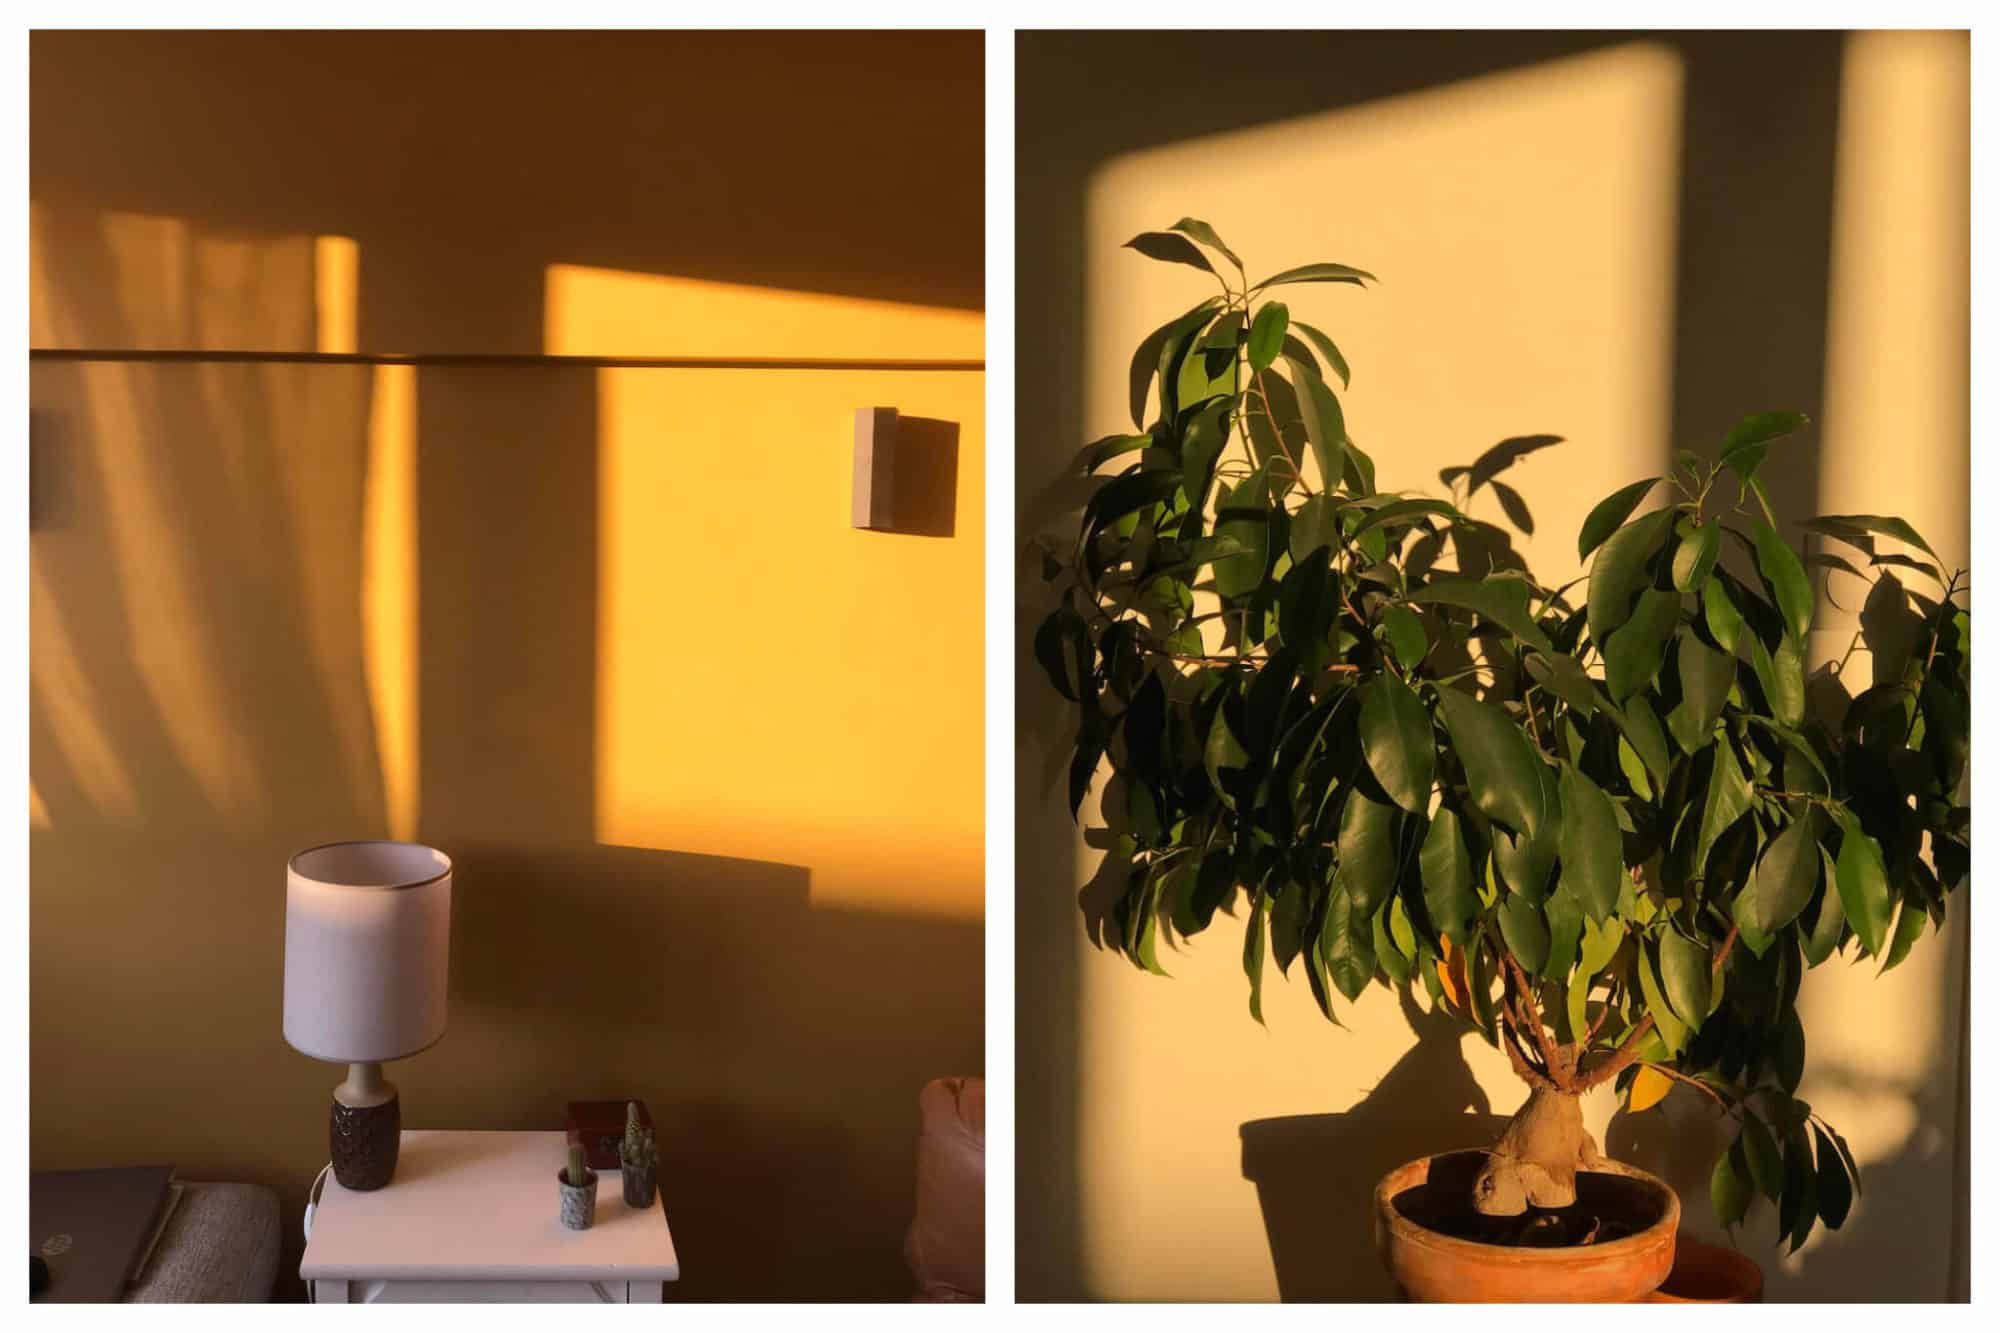 The sunshine casts a light on the walls and a plant in Rooksana's apartment. 